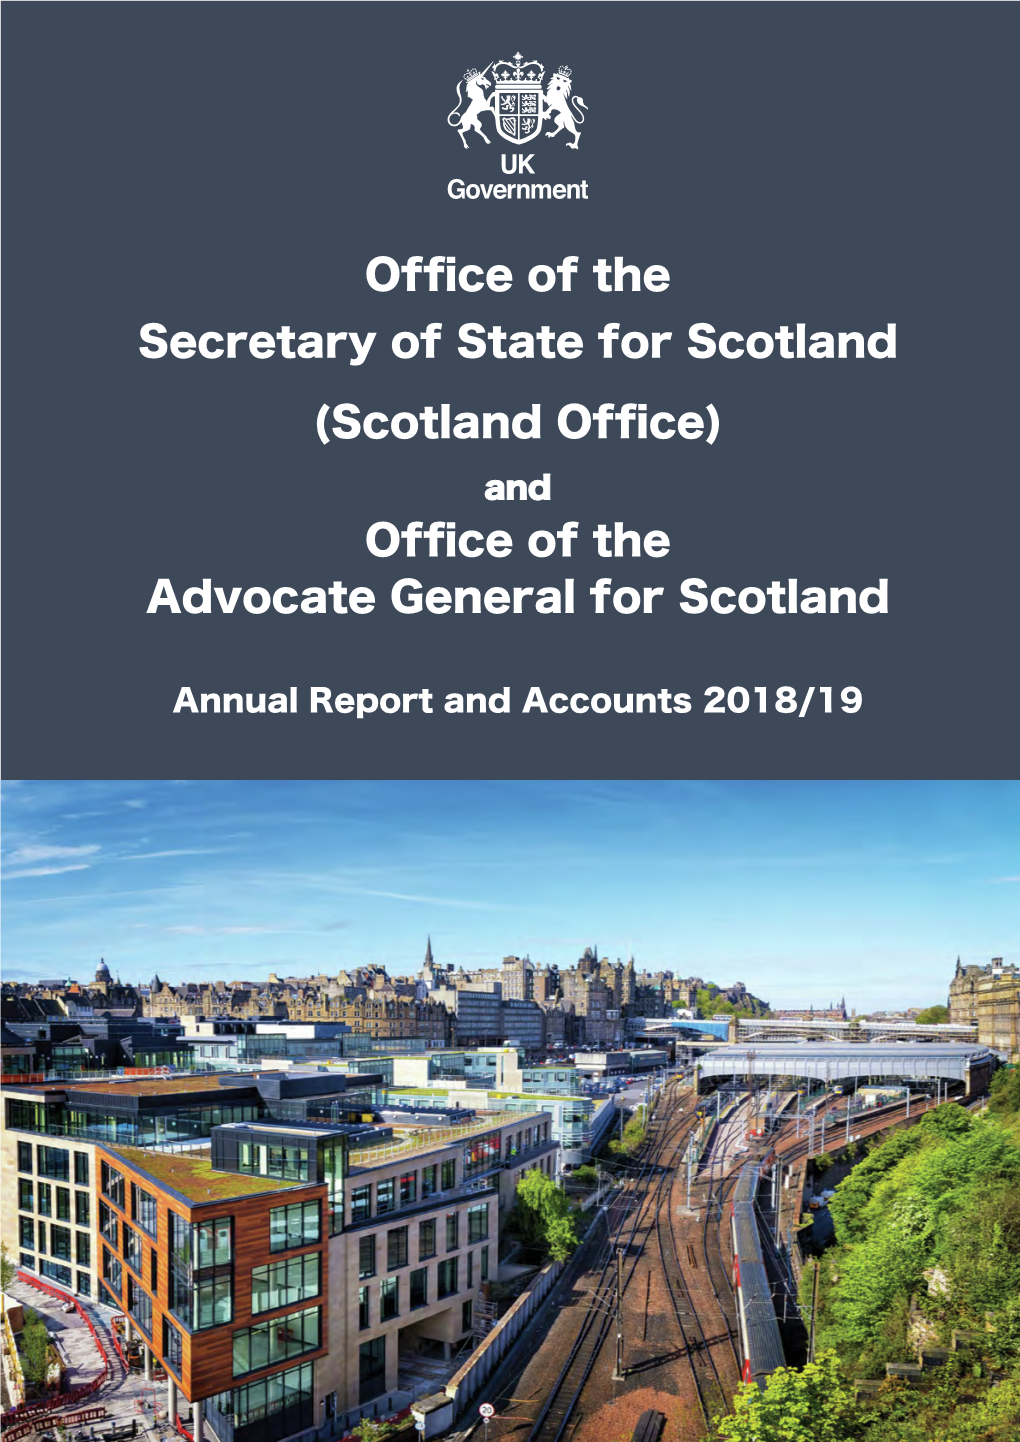 Scotland Office) and Office of the Advocate General for Scotland